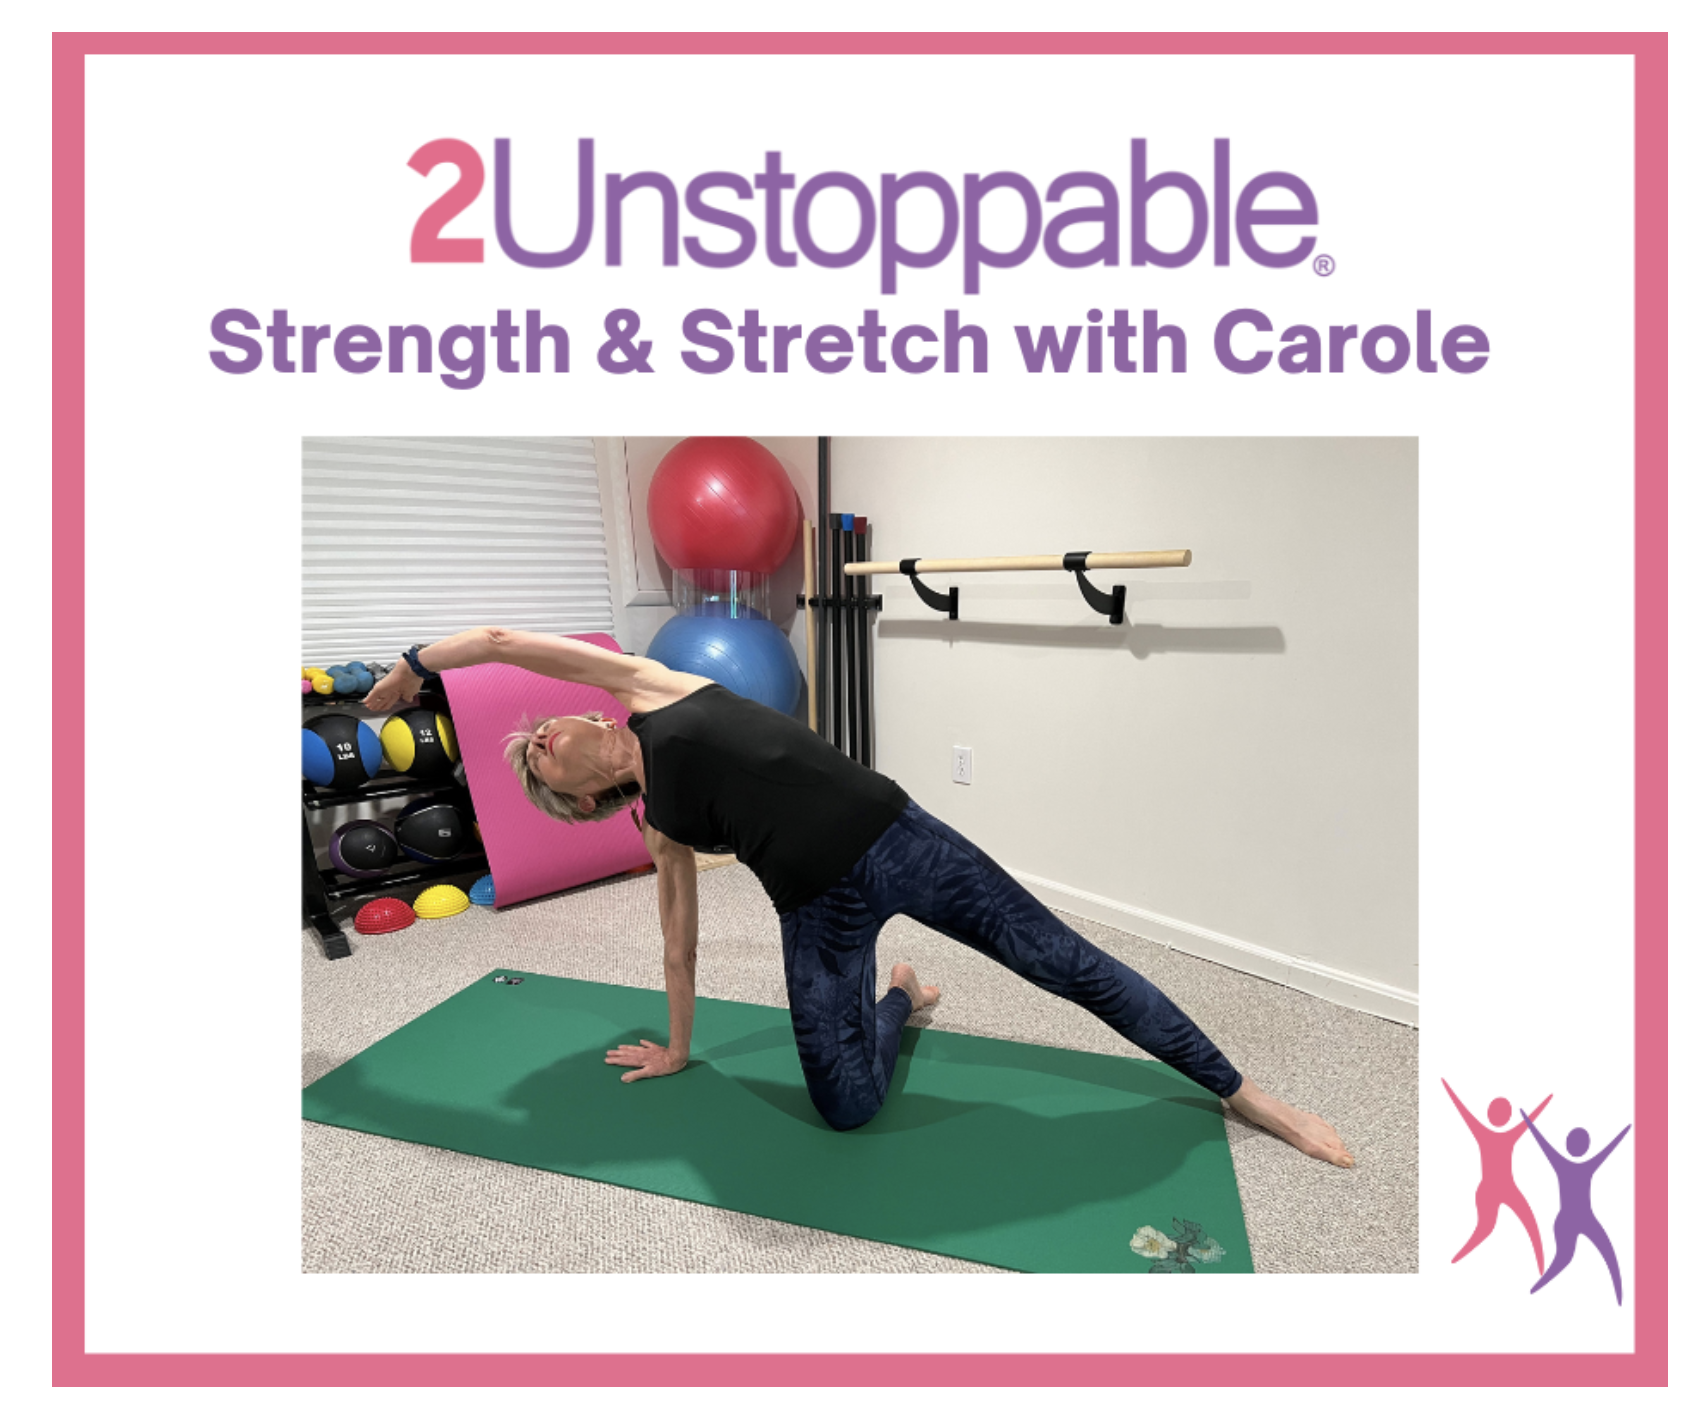 Get a Full-Body Stretch Using Our Just-for-You Stretching Tool